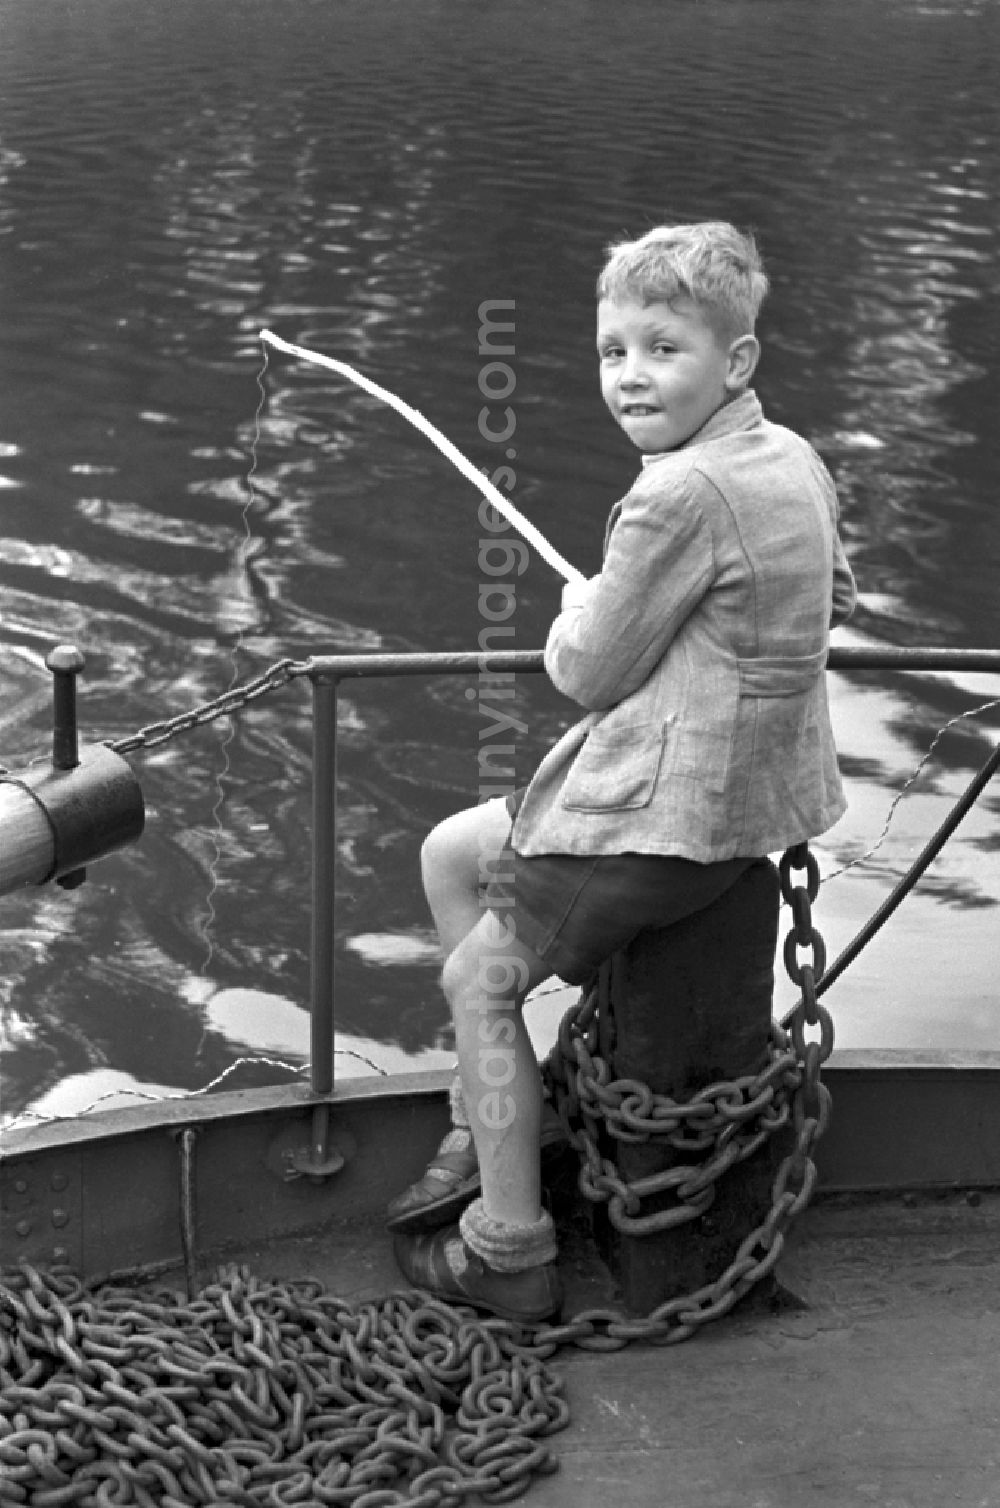 Dresden: Enduring fishing with a hand fishing rodby a little boy on street Terrassenufer in Dresden, Saxony on the territory of the former GDR, German Democratic Republic